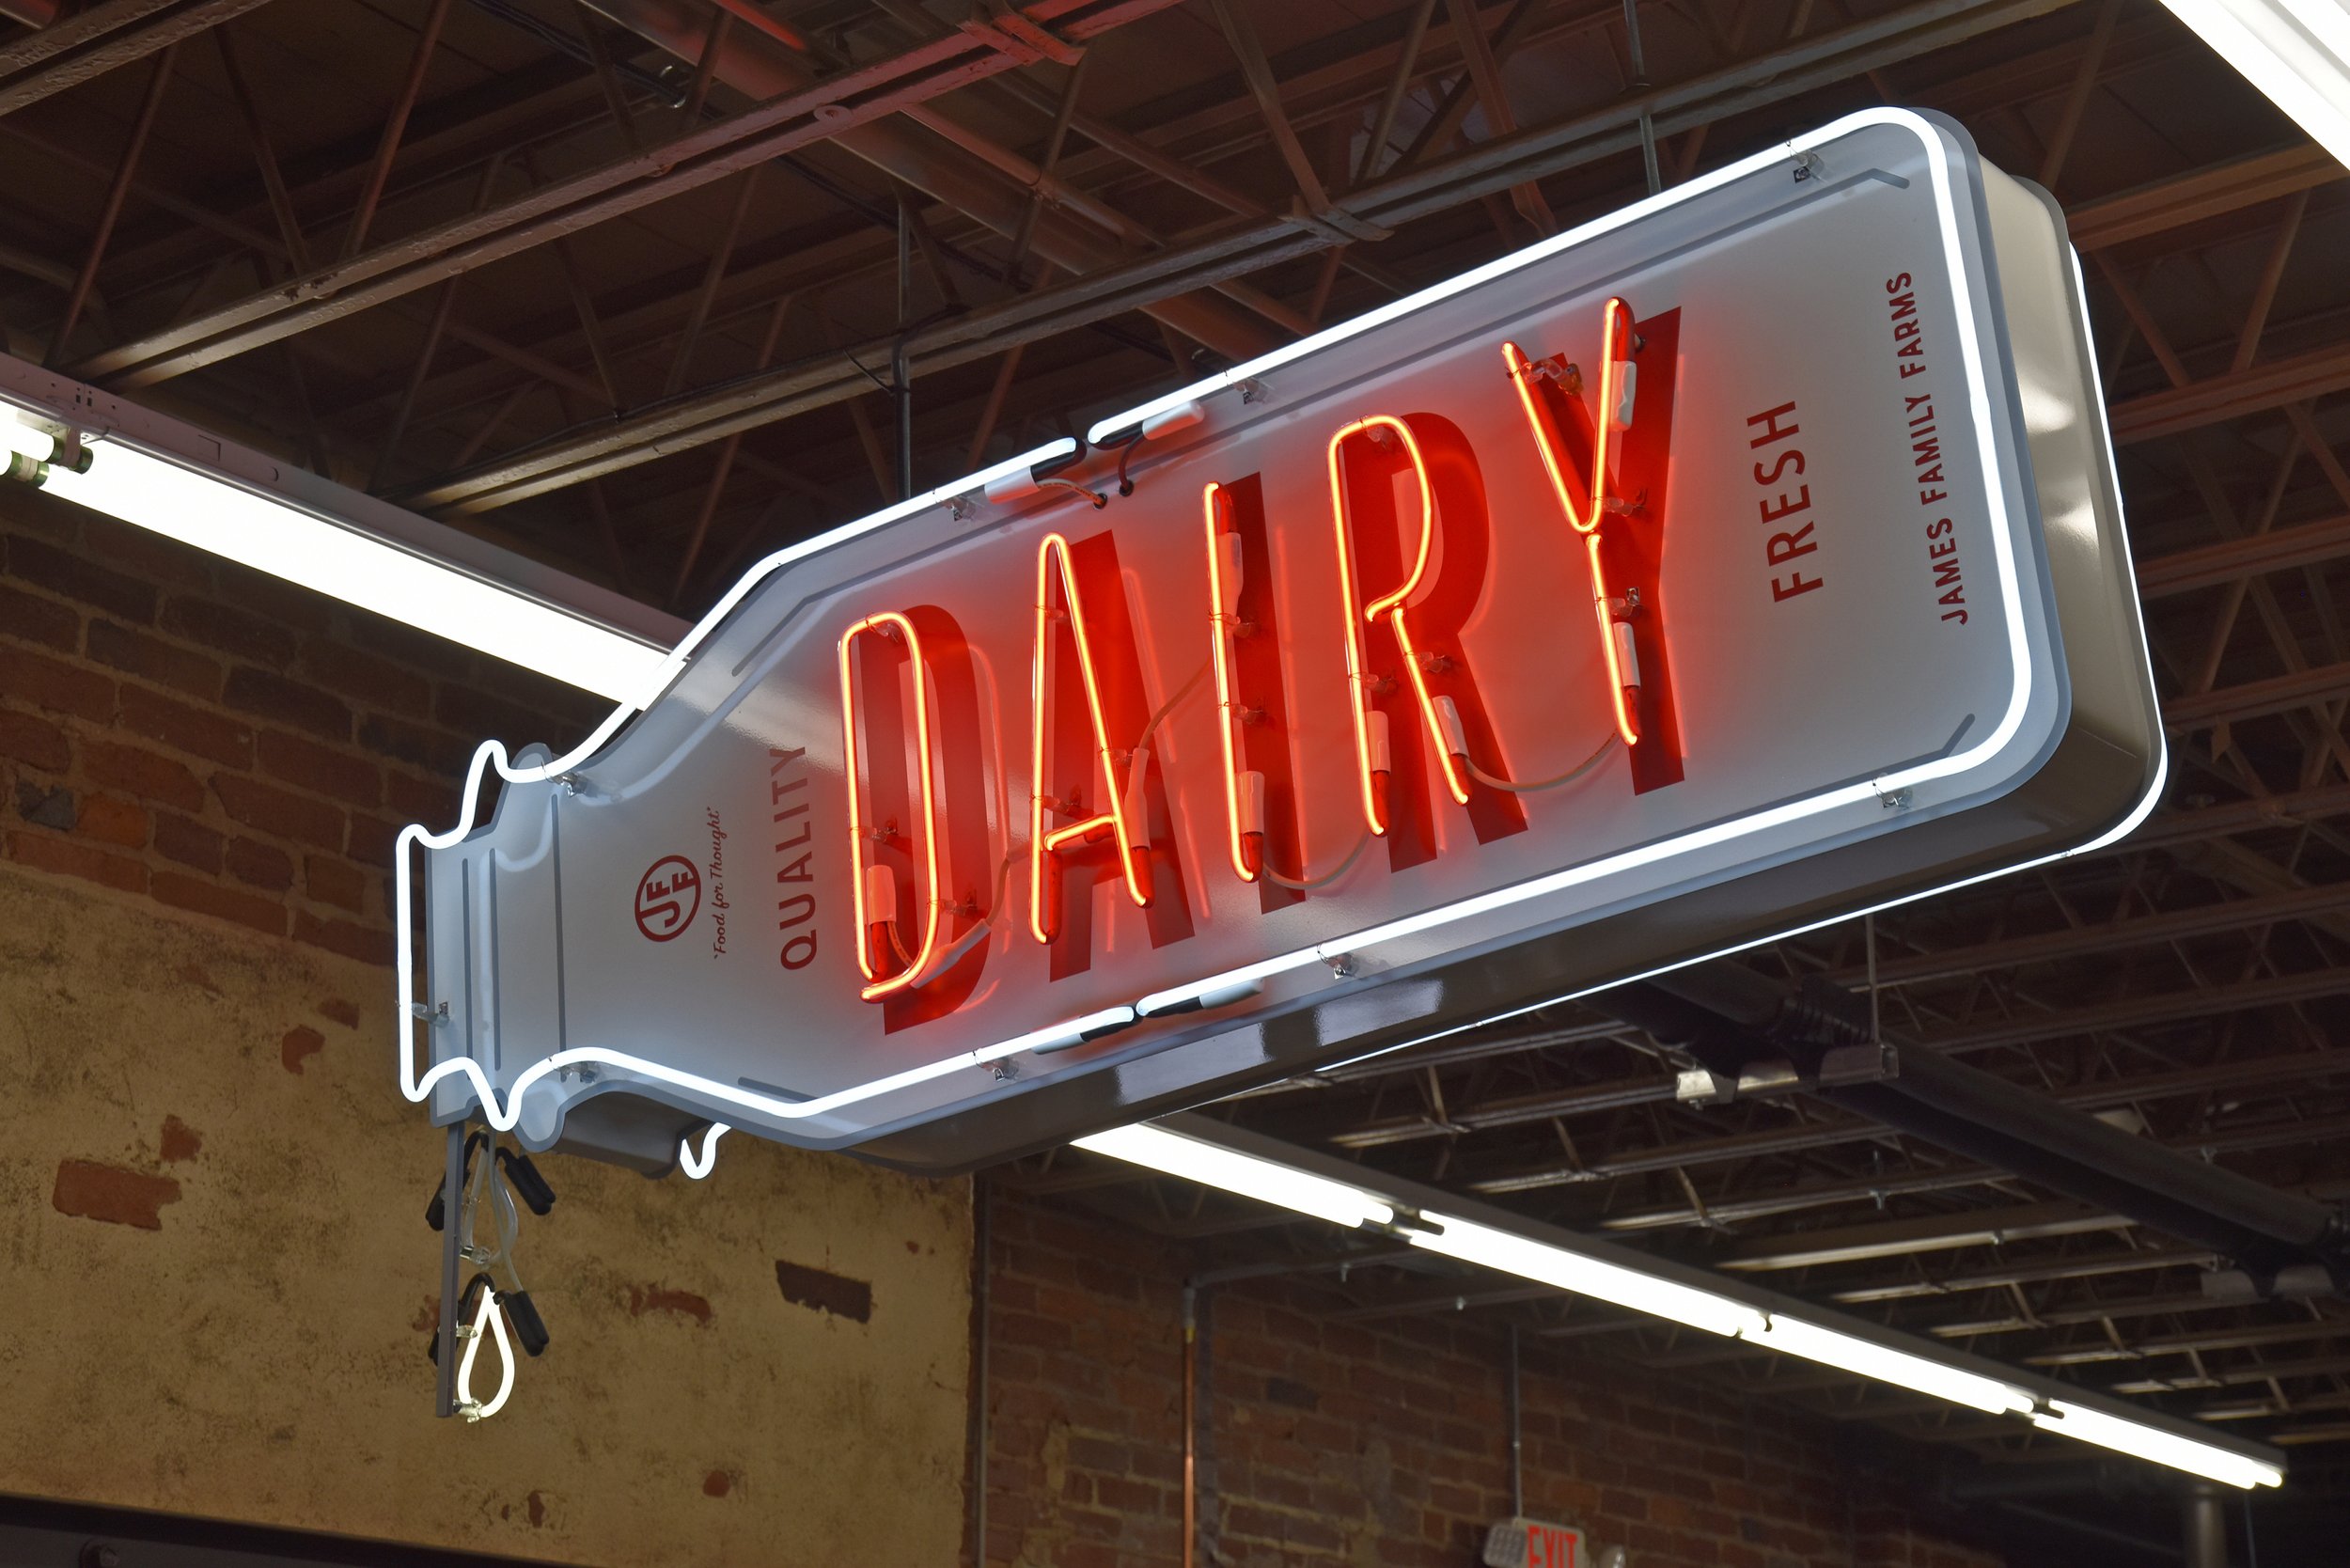  South Point Grocery  Downtown Memphis  “Dripping Milk Bottle” dairy department neon sign with flashing action drops  Branding creative and design by Chuck Mitchell  Sign fabrication and installation by Frank Balton Sign Company 